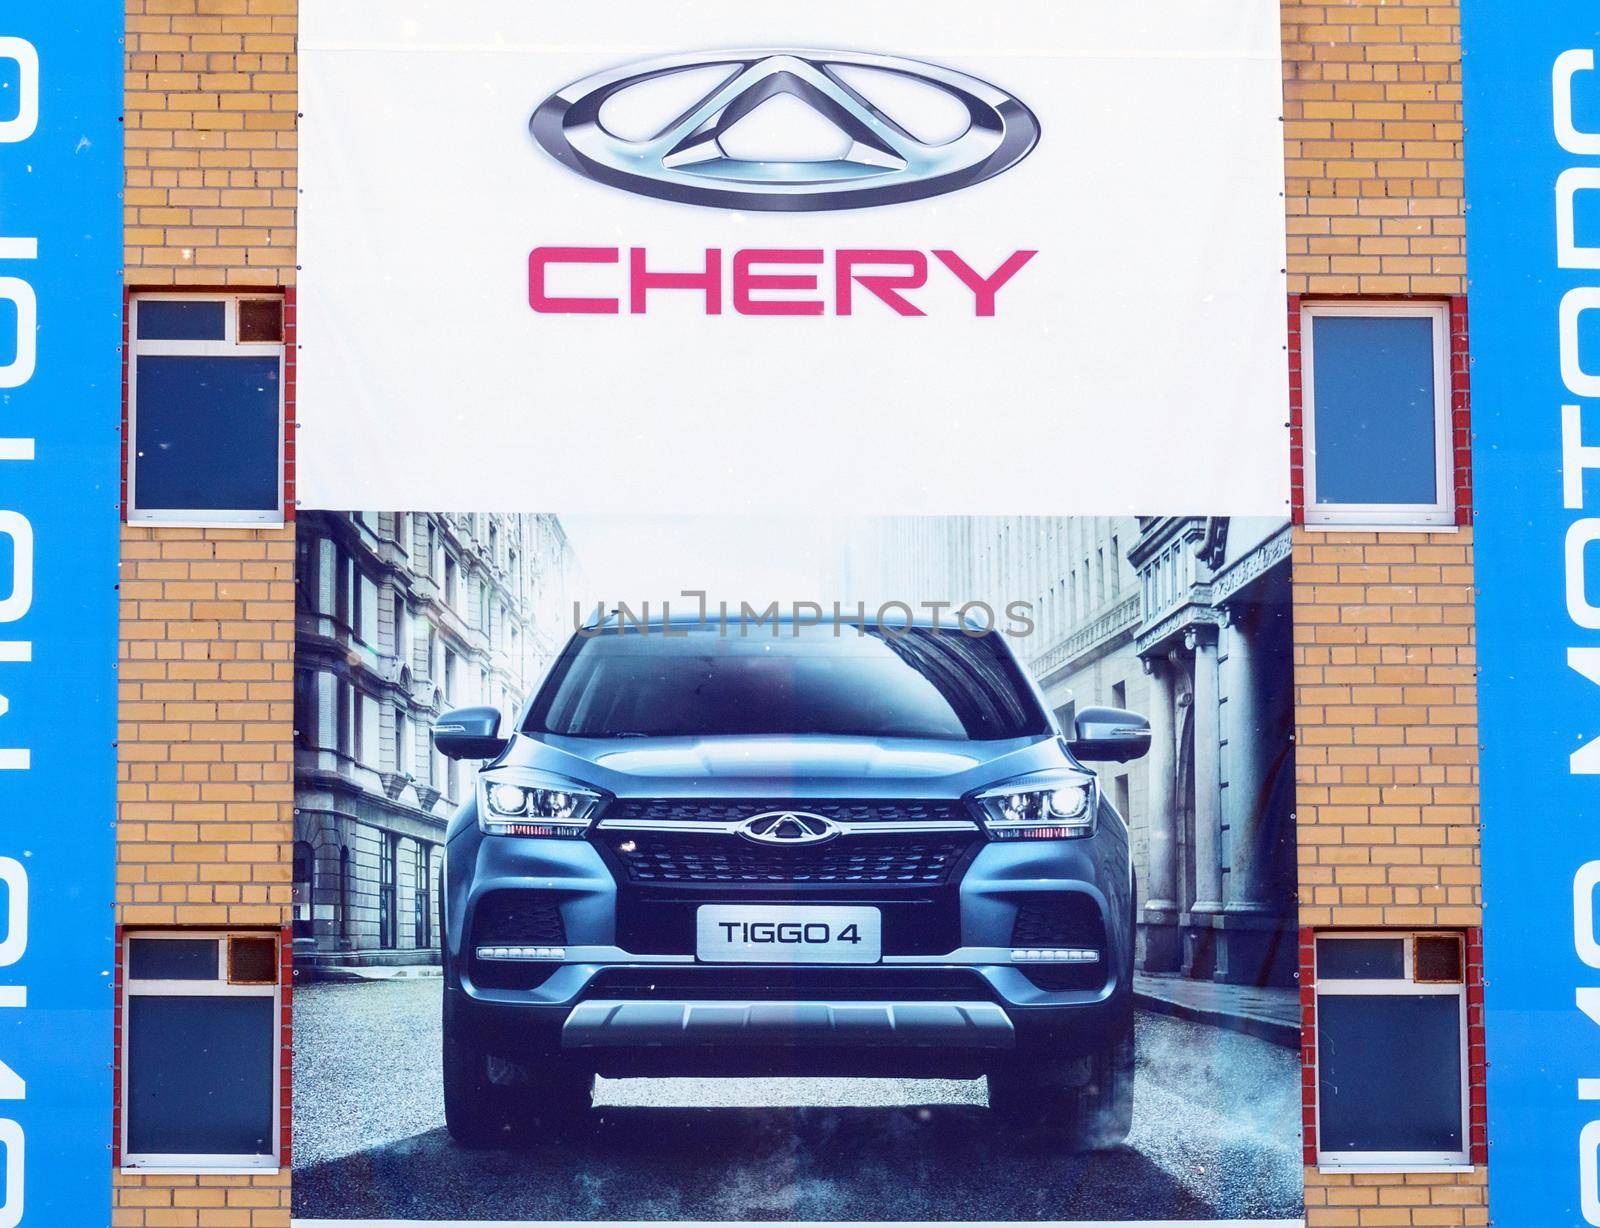 Tyumen, Russia-June 3, 2021: Chery on the car building is an automobile manufacturing company headquartered in China